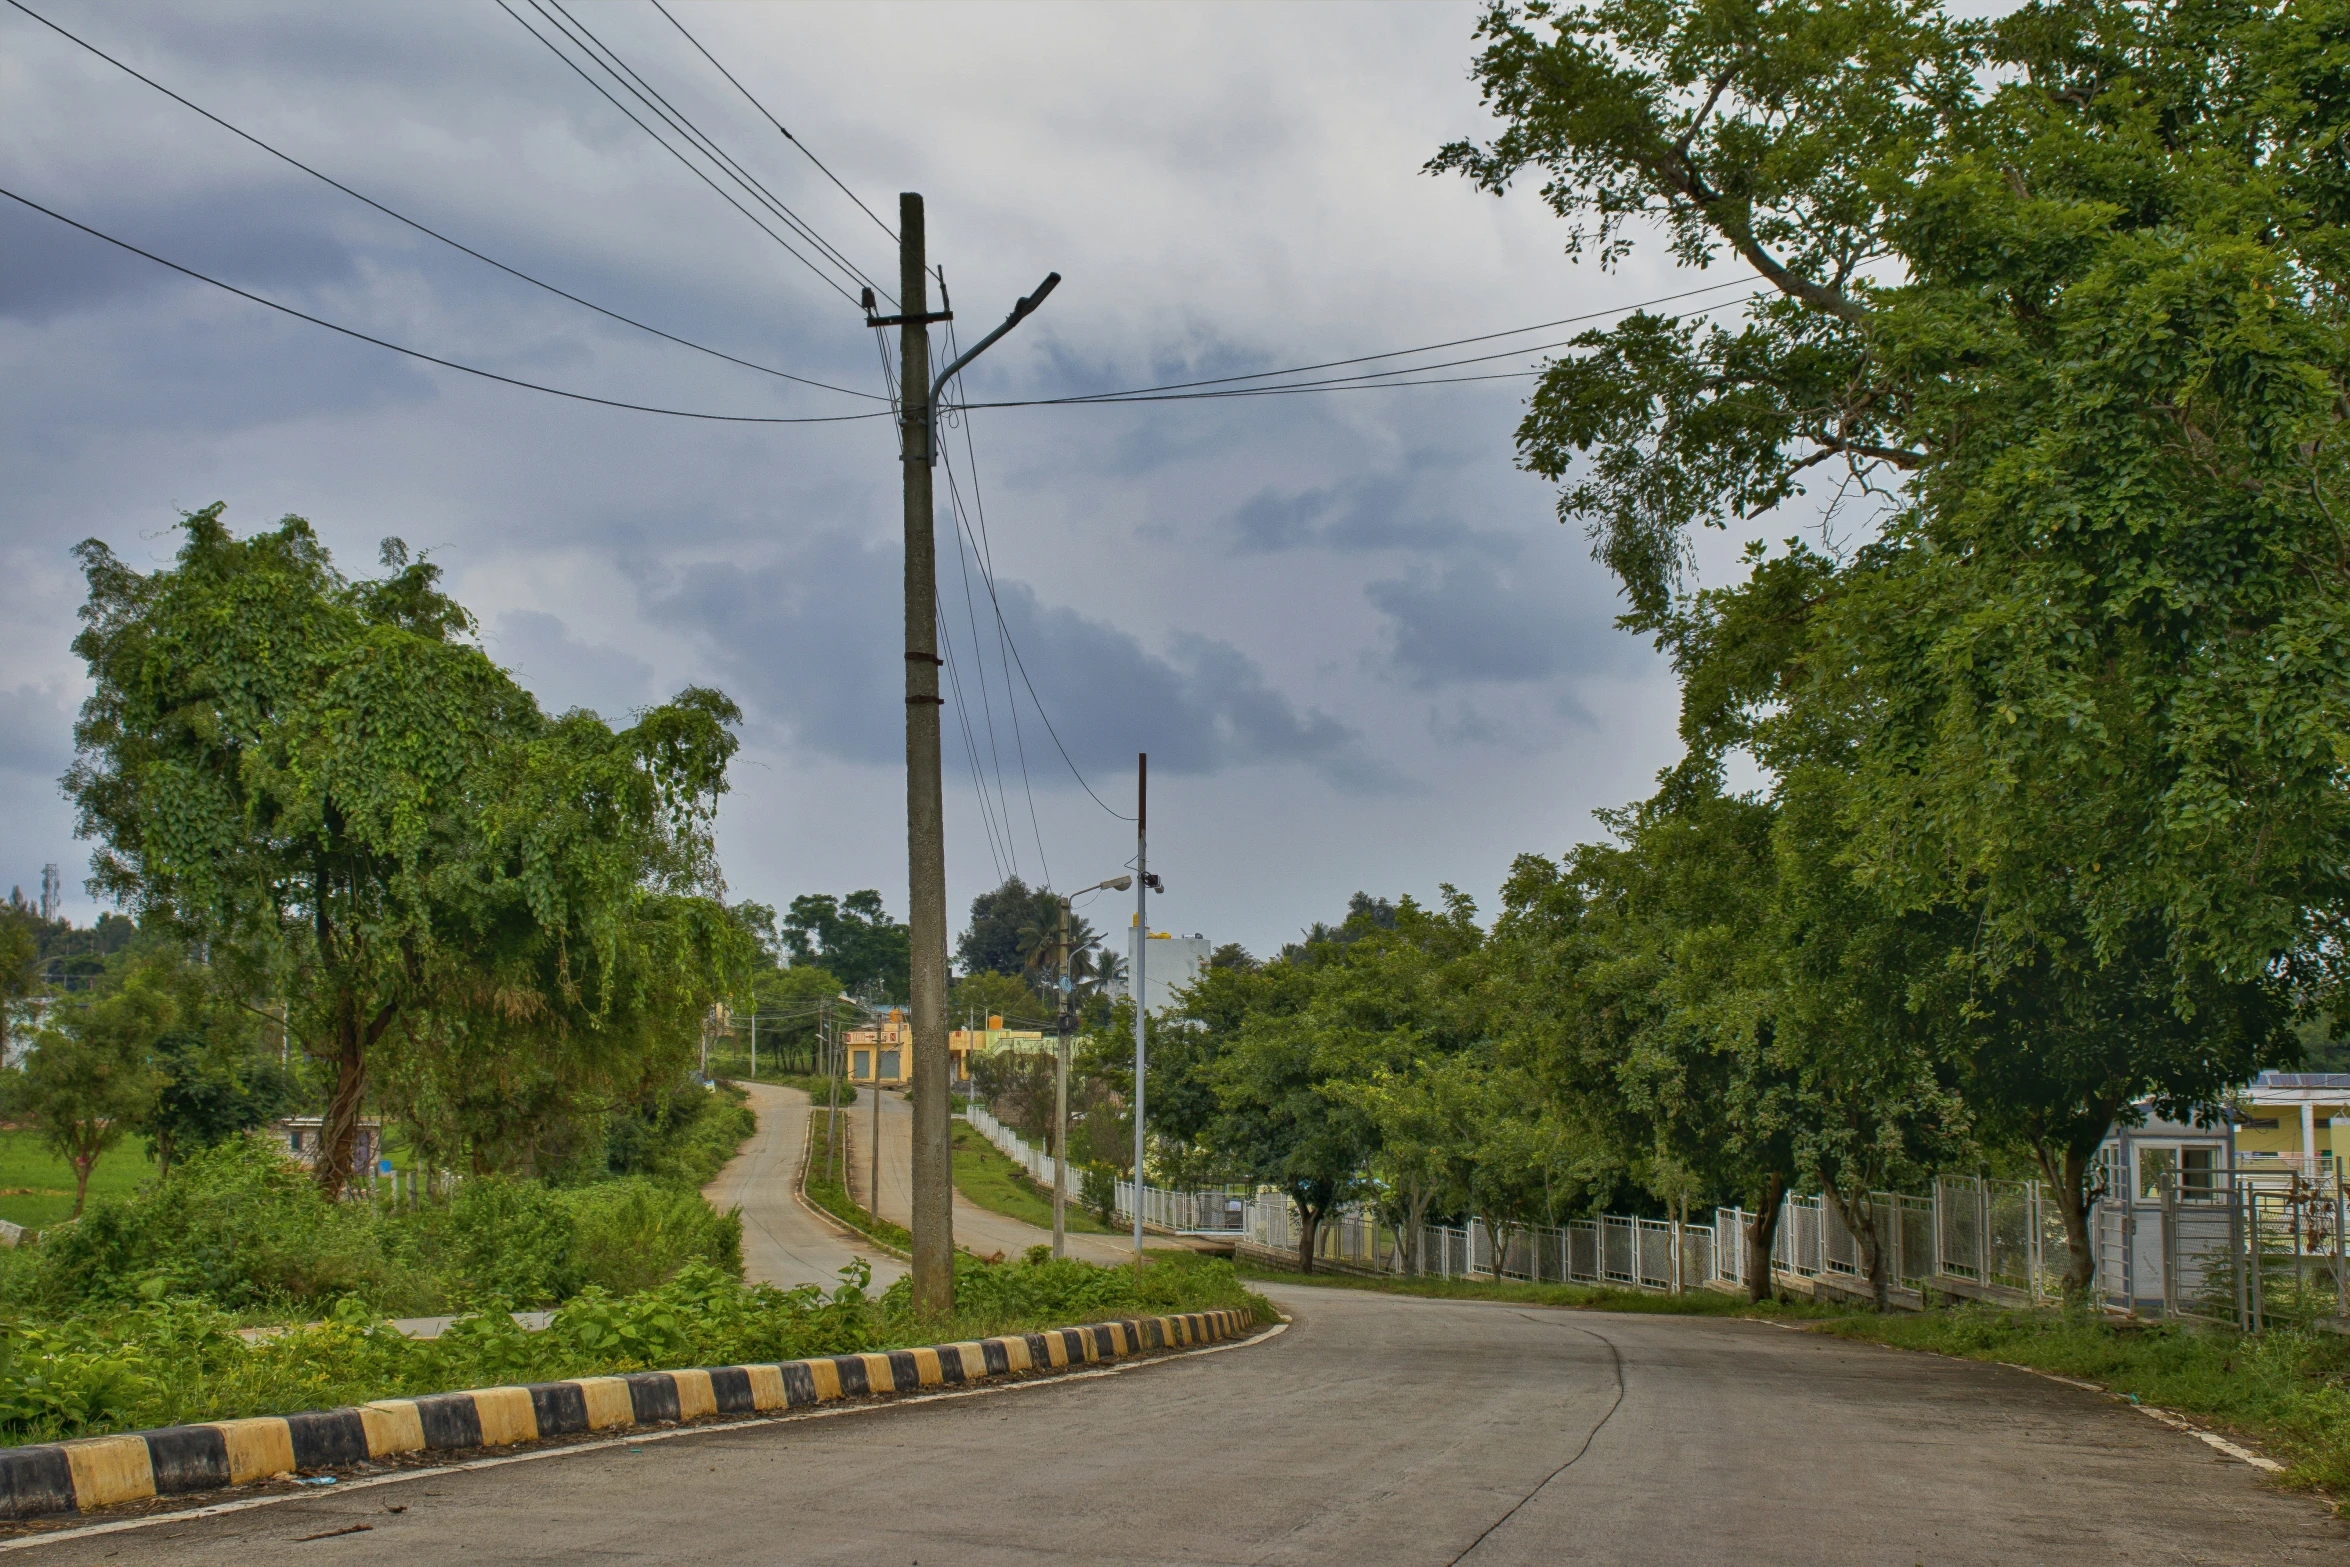 a rural street is surrounded by lush trees